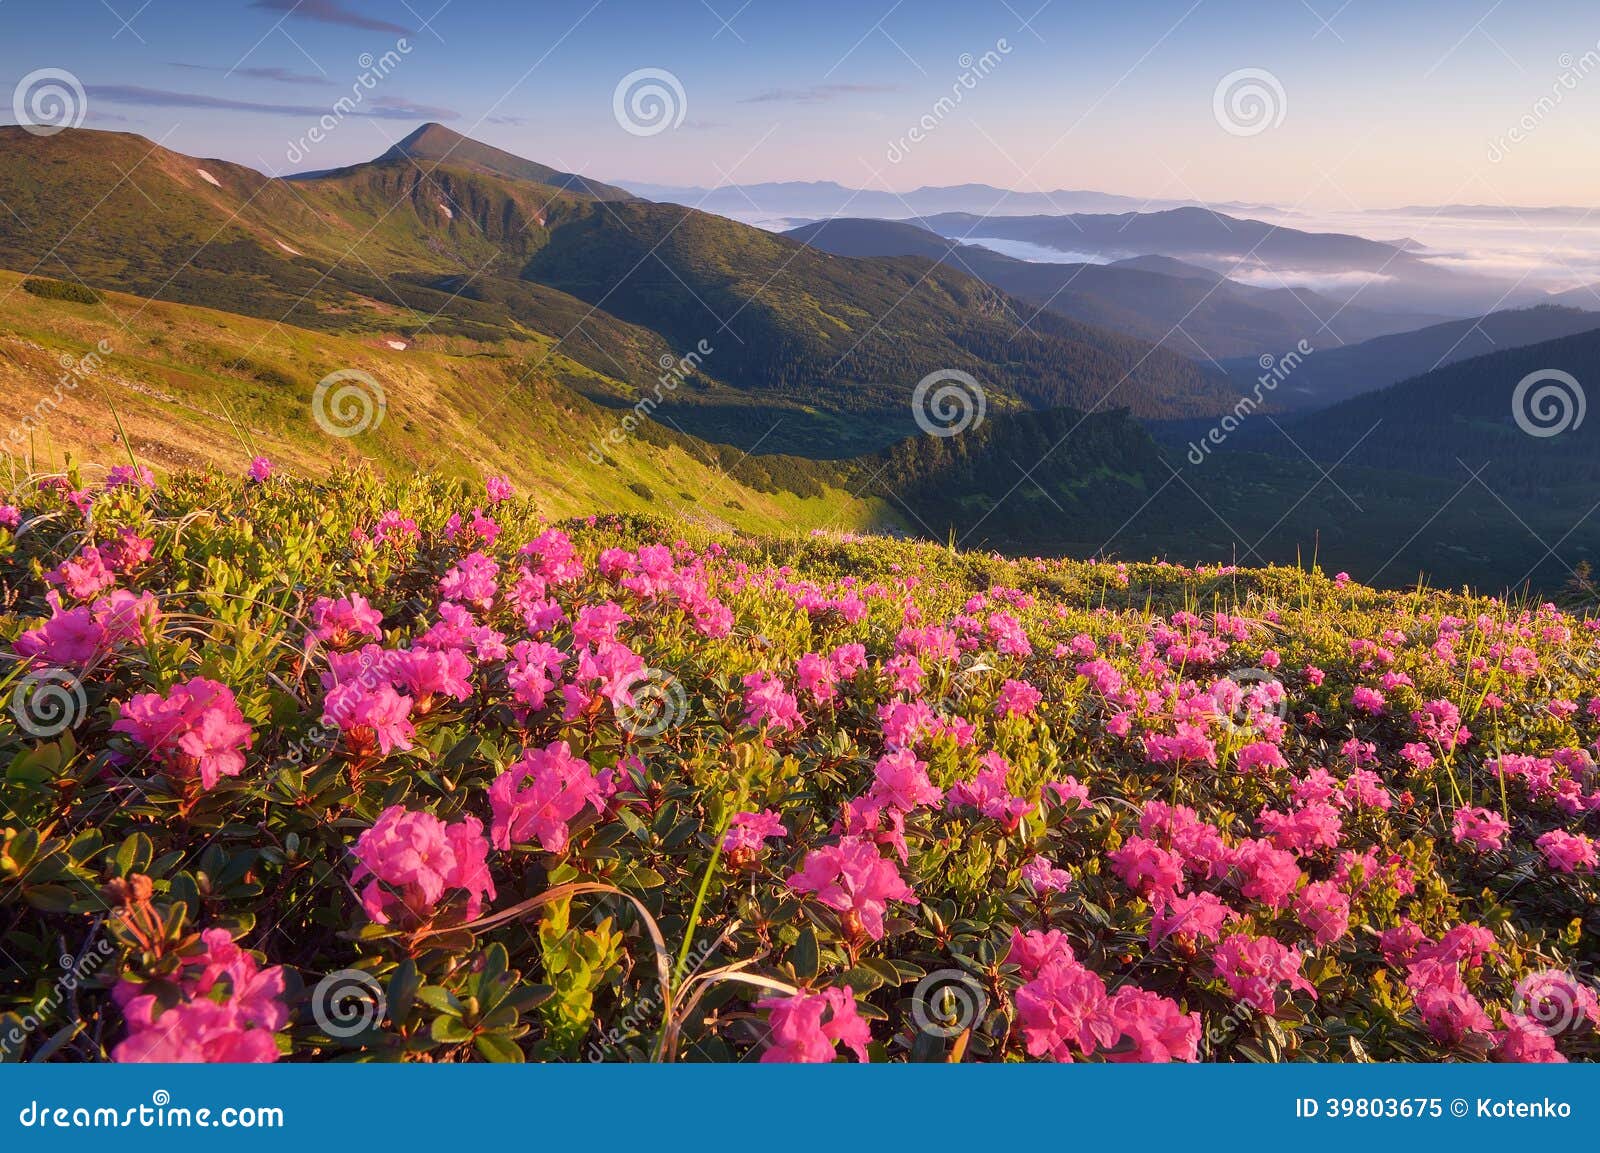 Summer Flowers In The Mountains Stock Photo Image 39803675